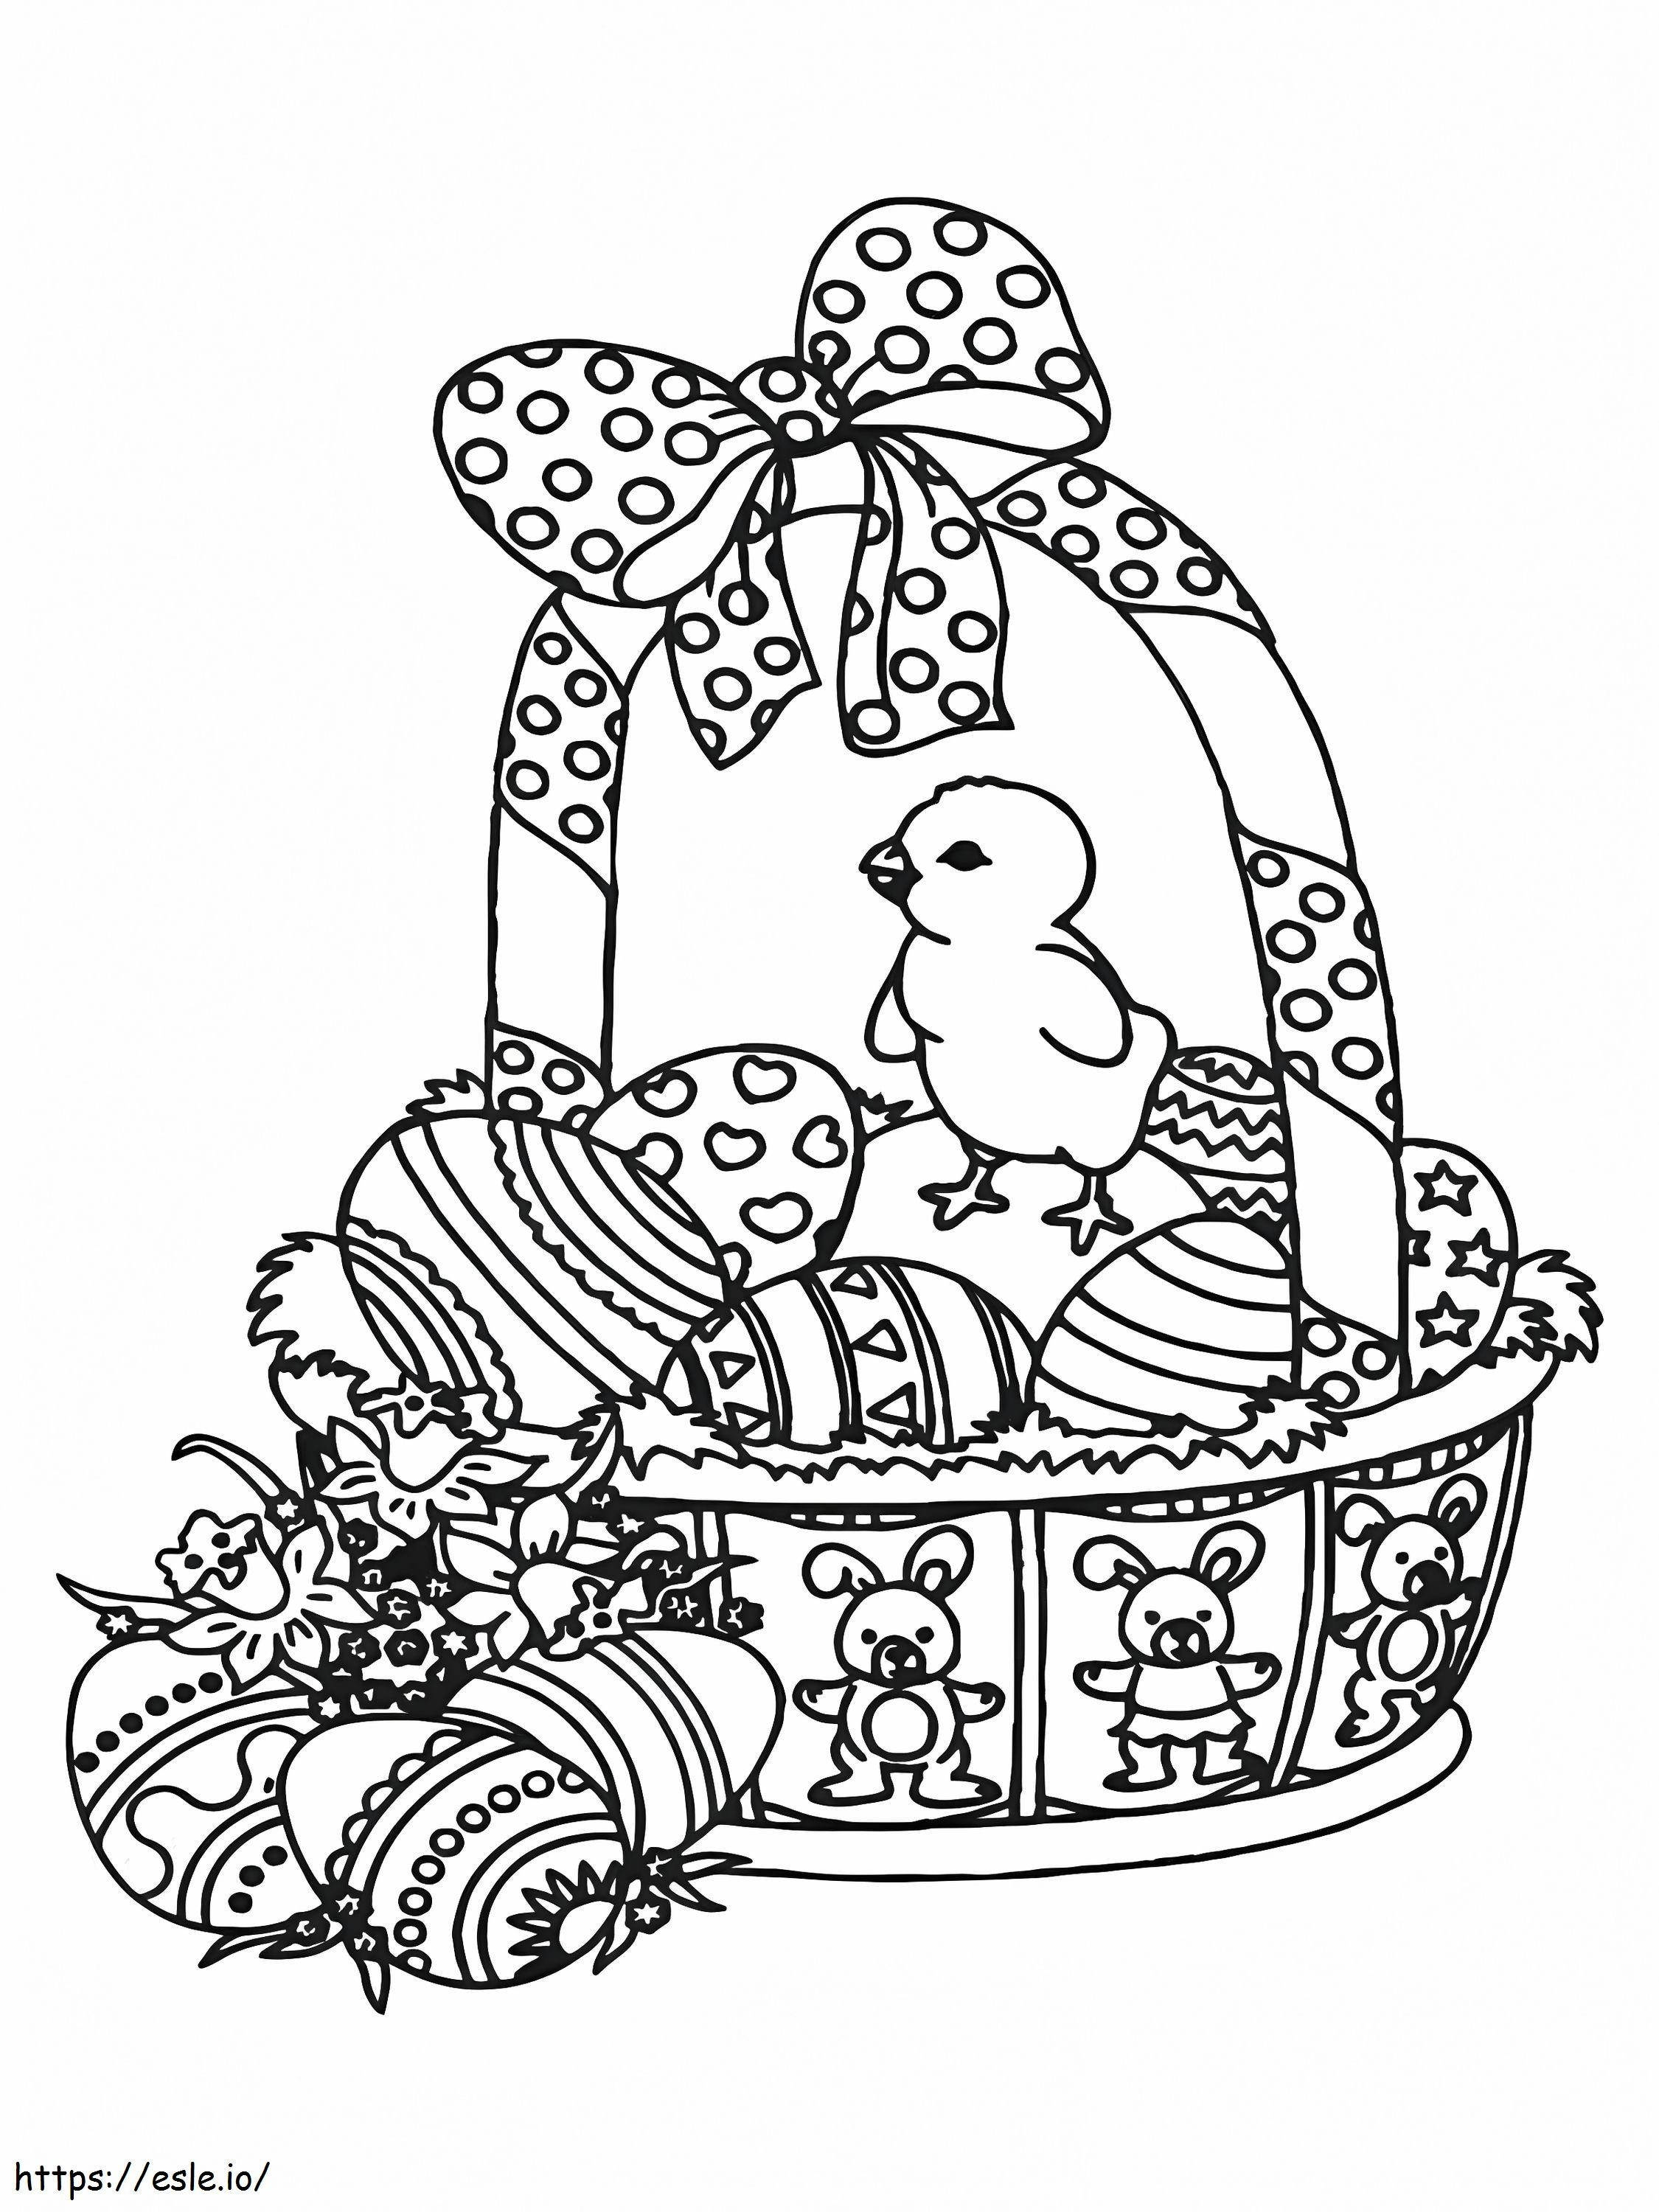 Easter Eggs And Basket With Chick coloring page